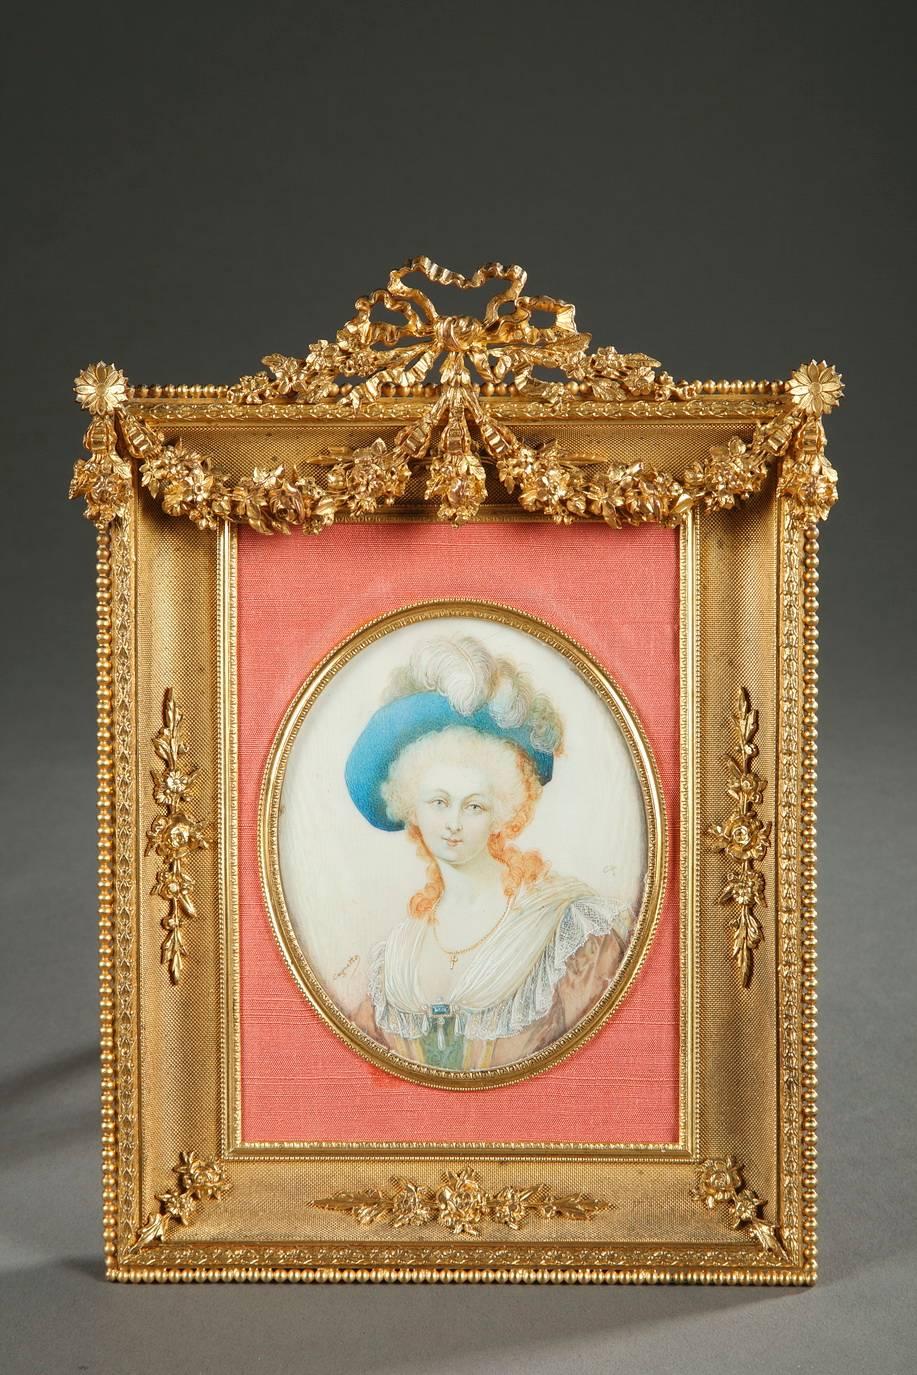 Exquisite 19th century gilt bronze frame for a miniature, hemmed with a frieze of beads and crowned with a ribbon. Two small flowers support a rich, double, flowering garland. The three other curved sides of the frame are intricately engraved with